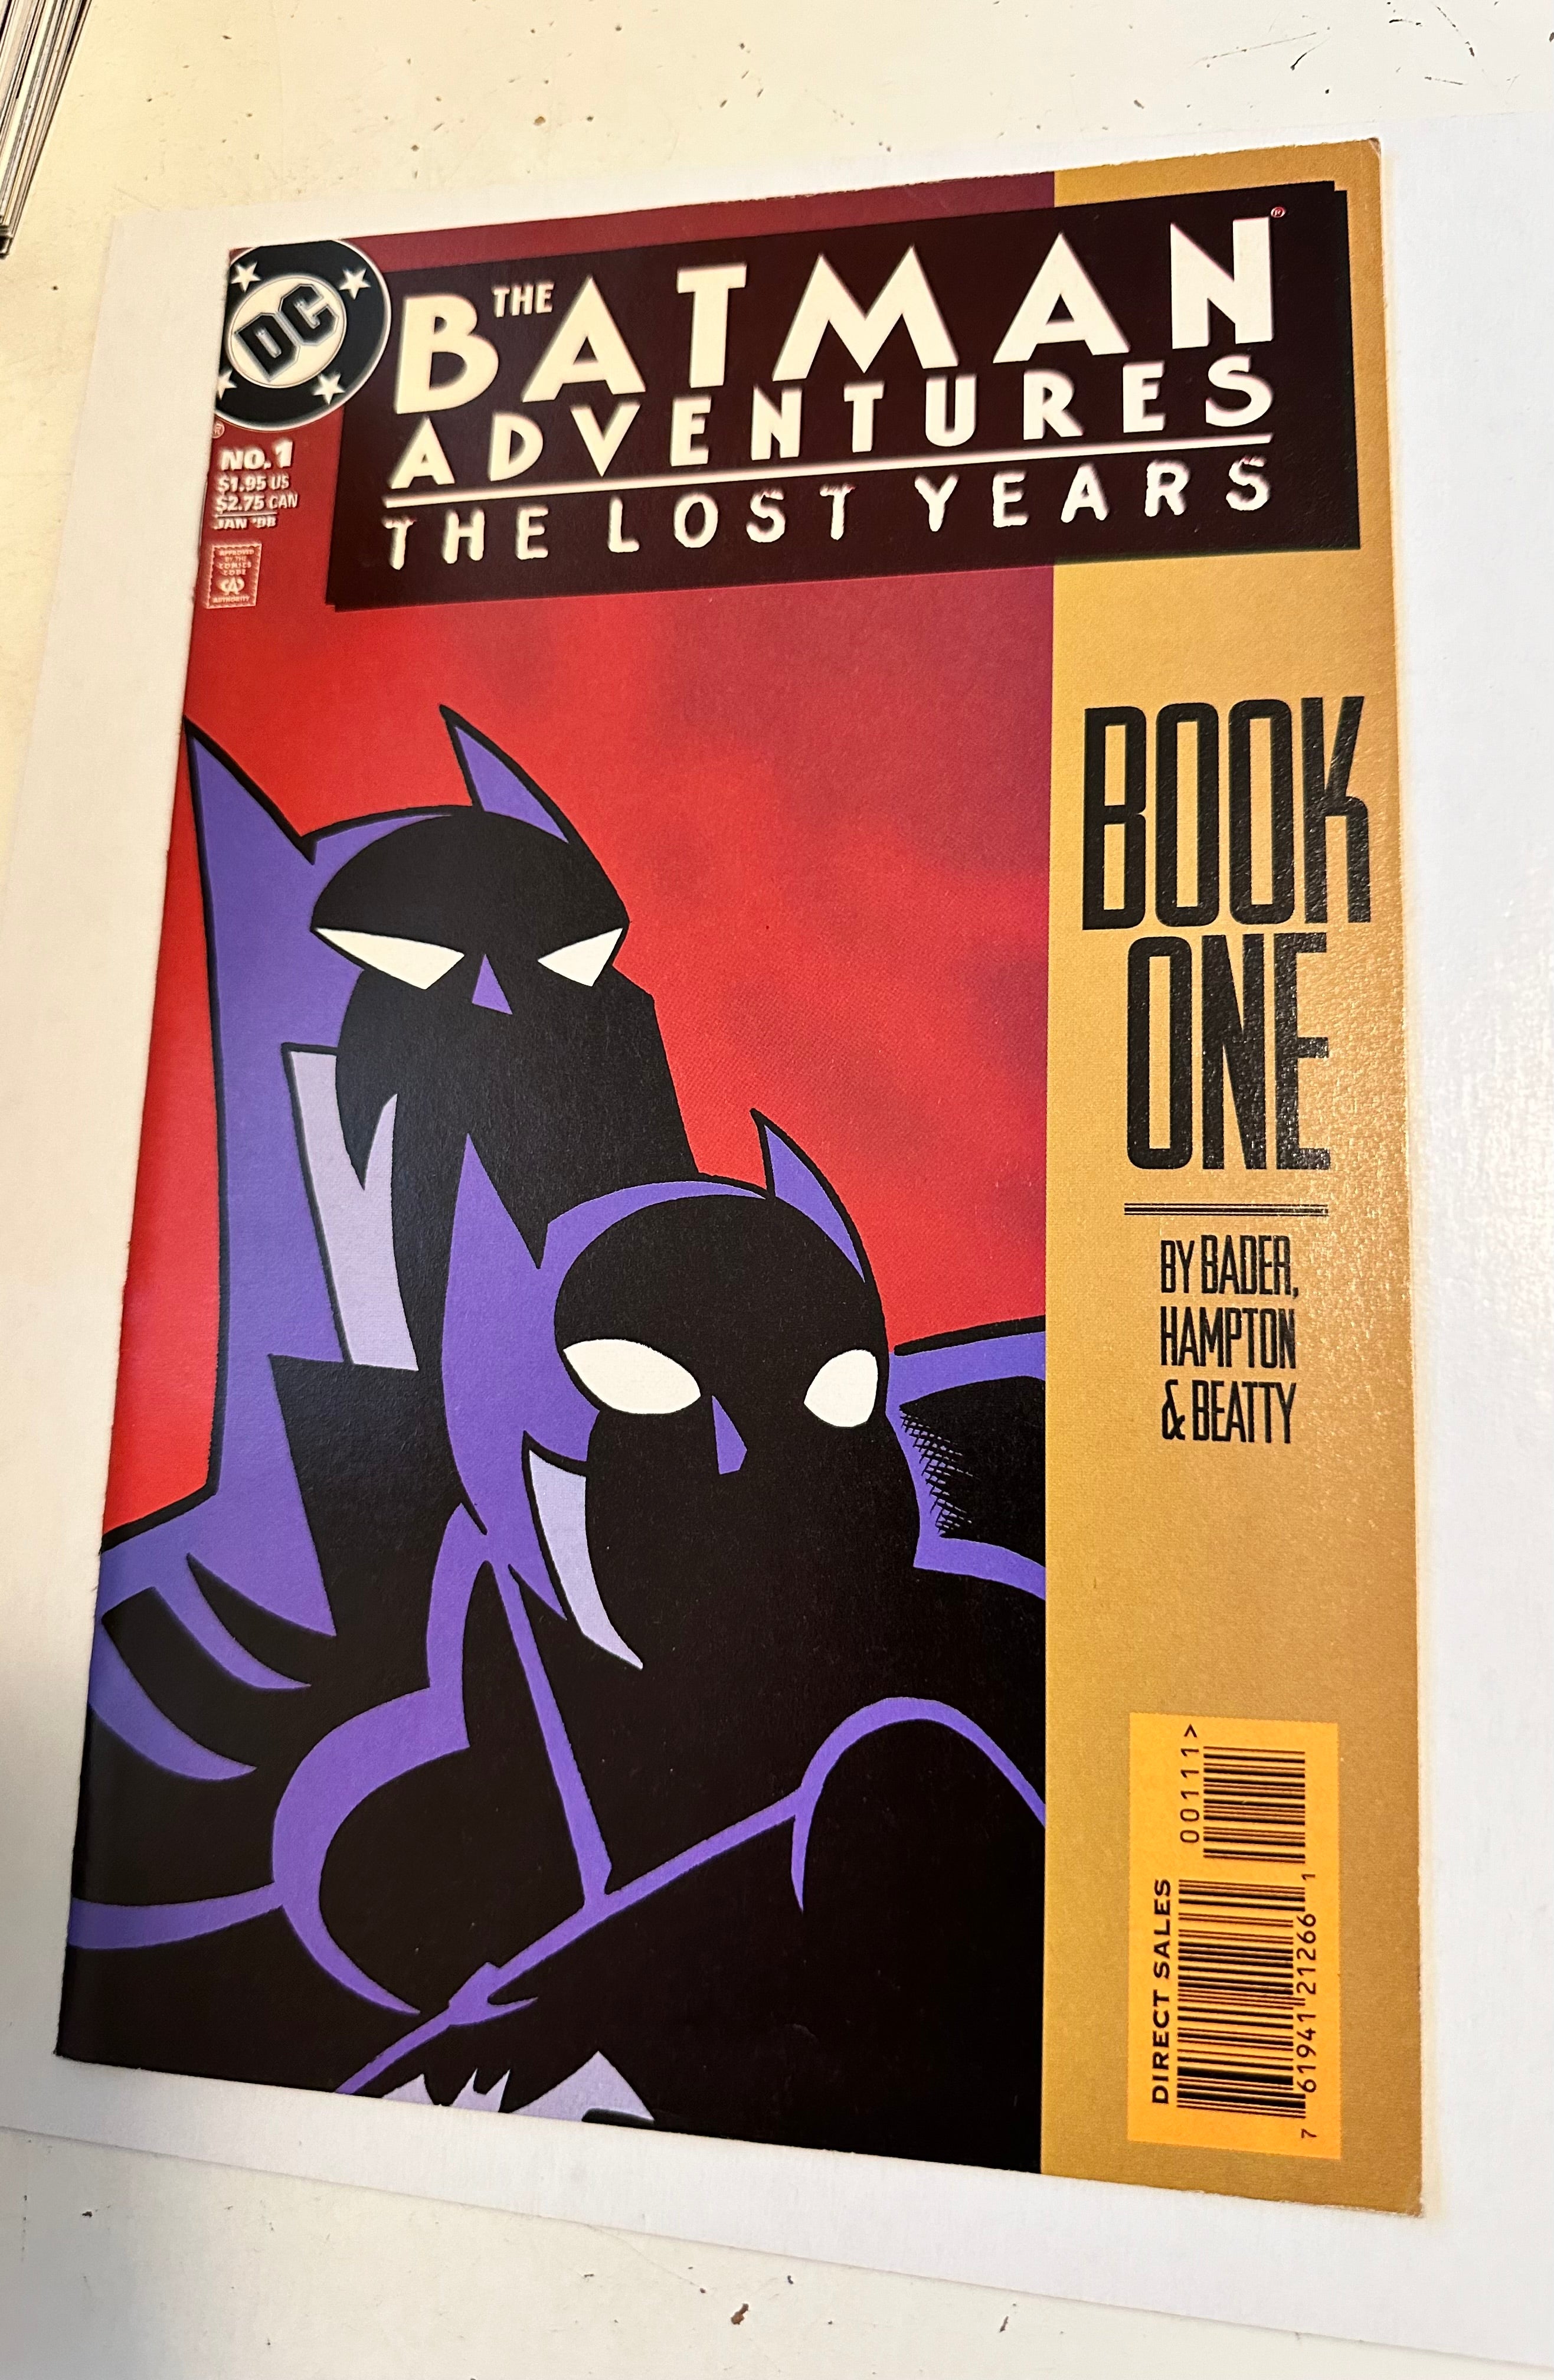 The Batmanadventures , lost year’s book one VF condition, 1998